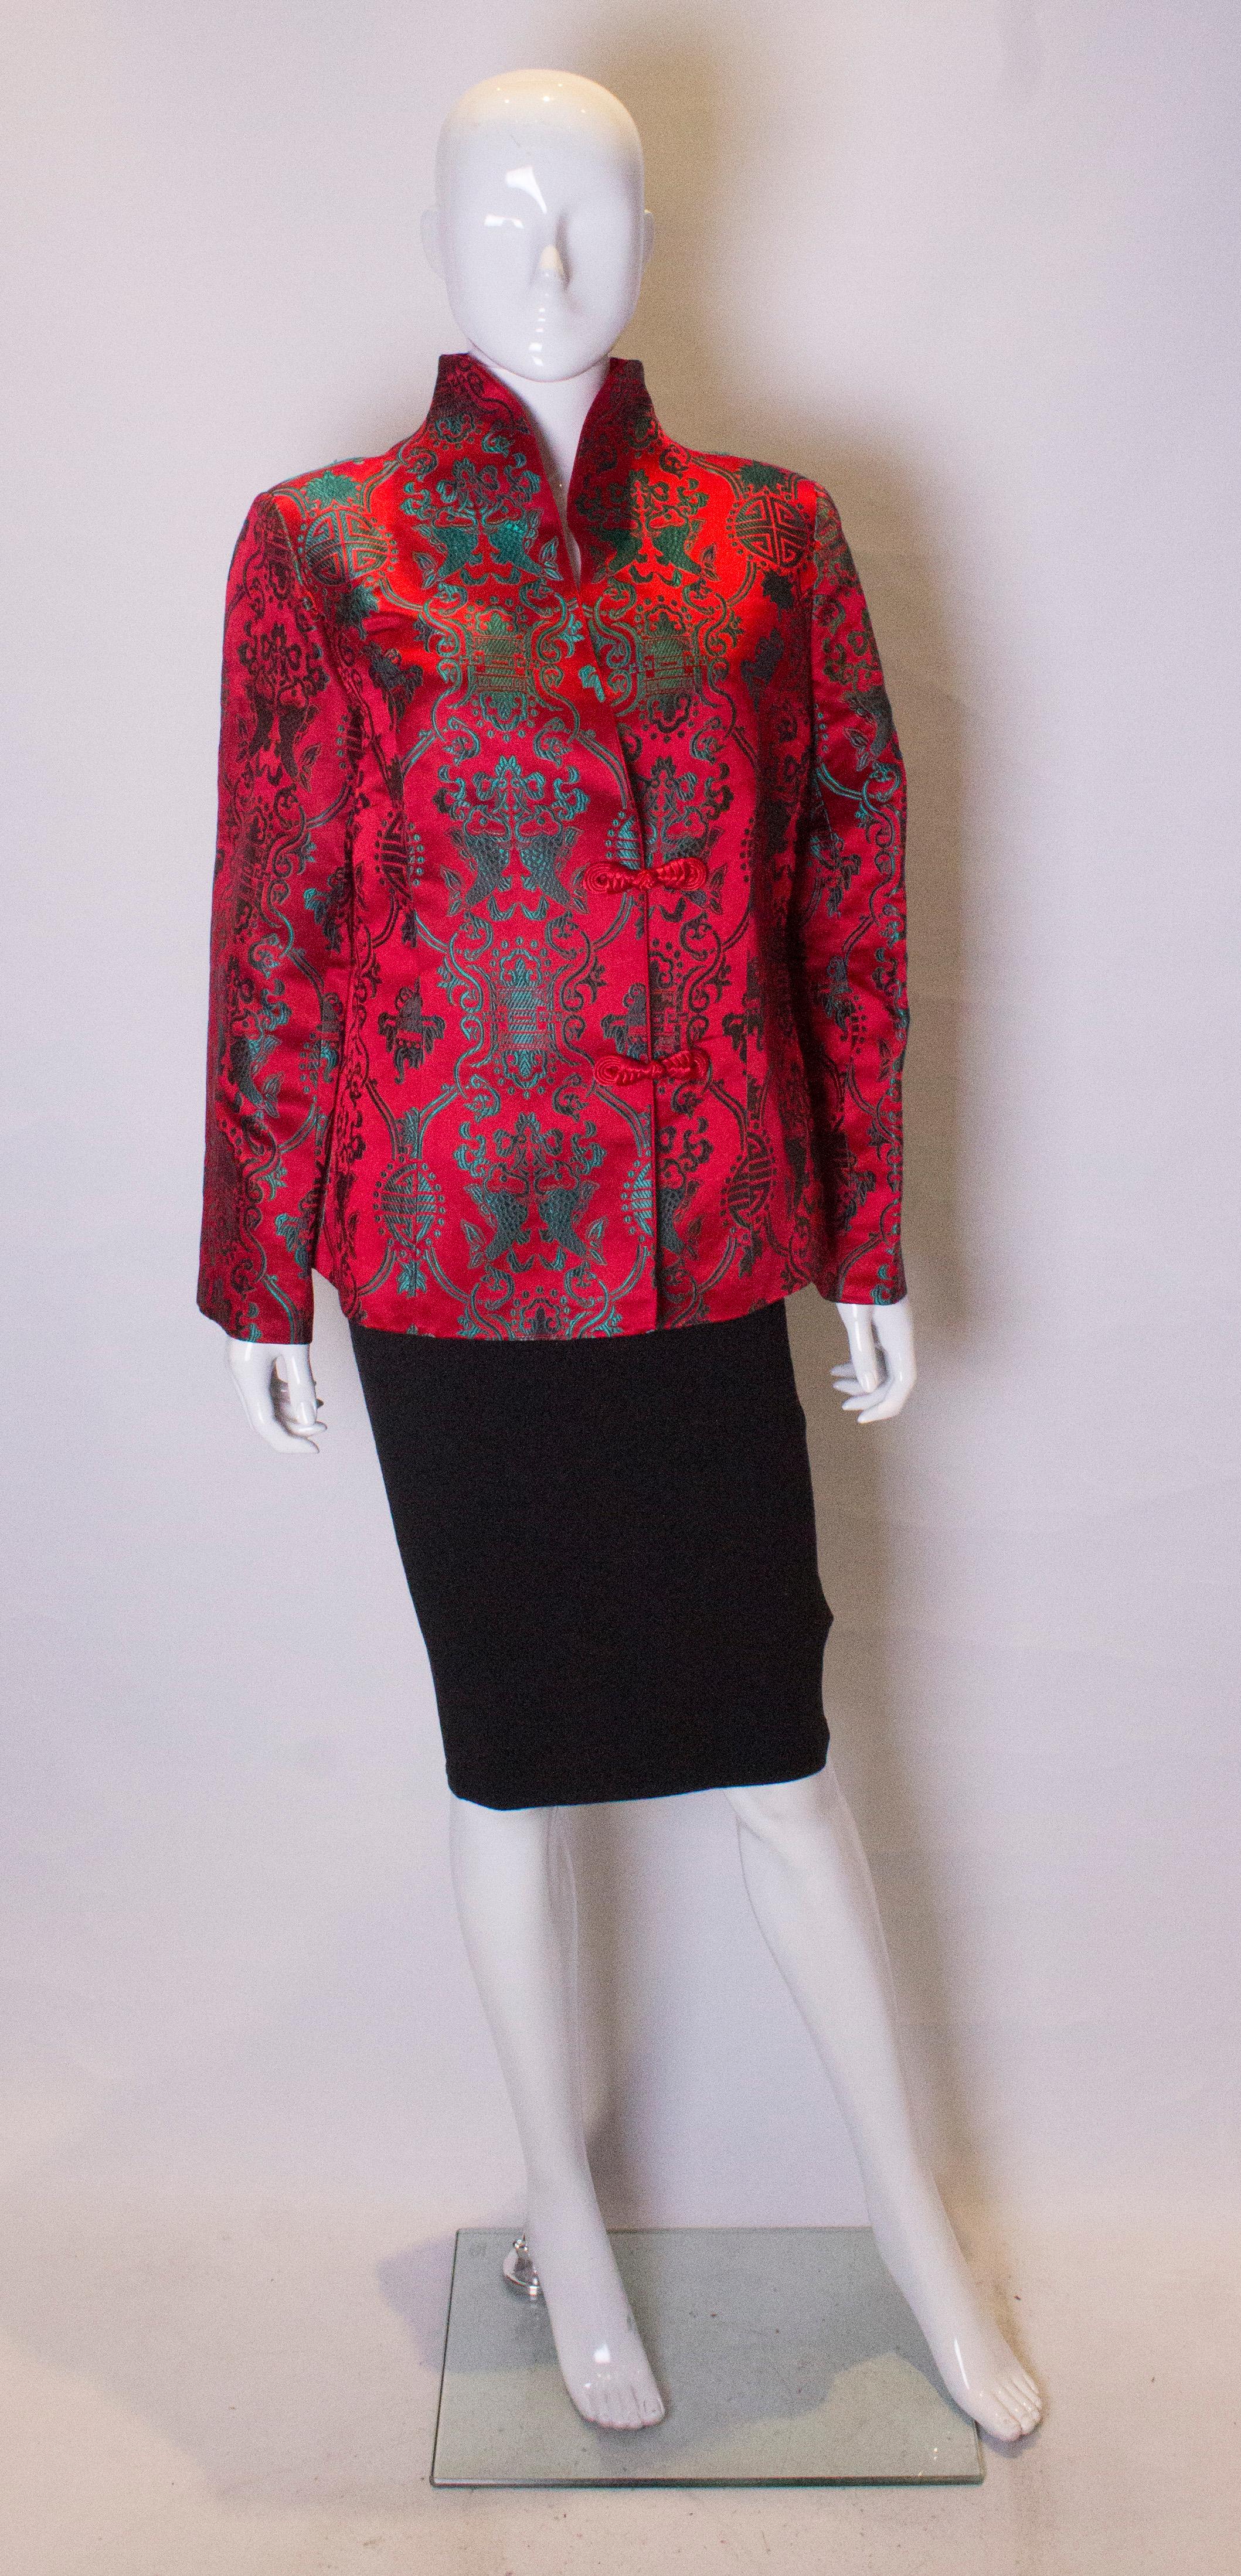 A chic and headturning Chinese jacket. The jacket is in a vibrant scarlet colour with turquoise print. It has a stand up collar and fastens with two toggles.